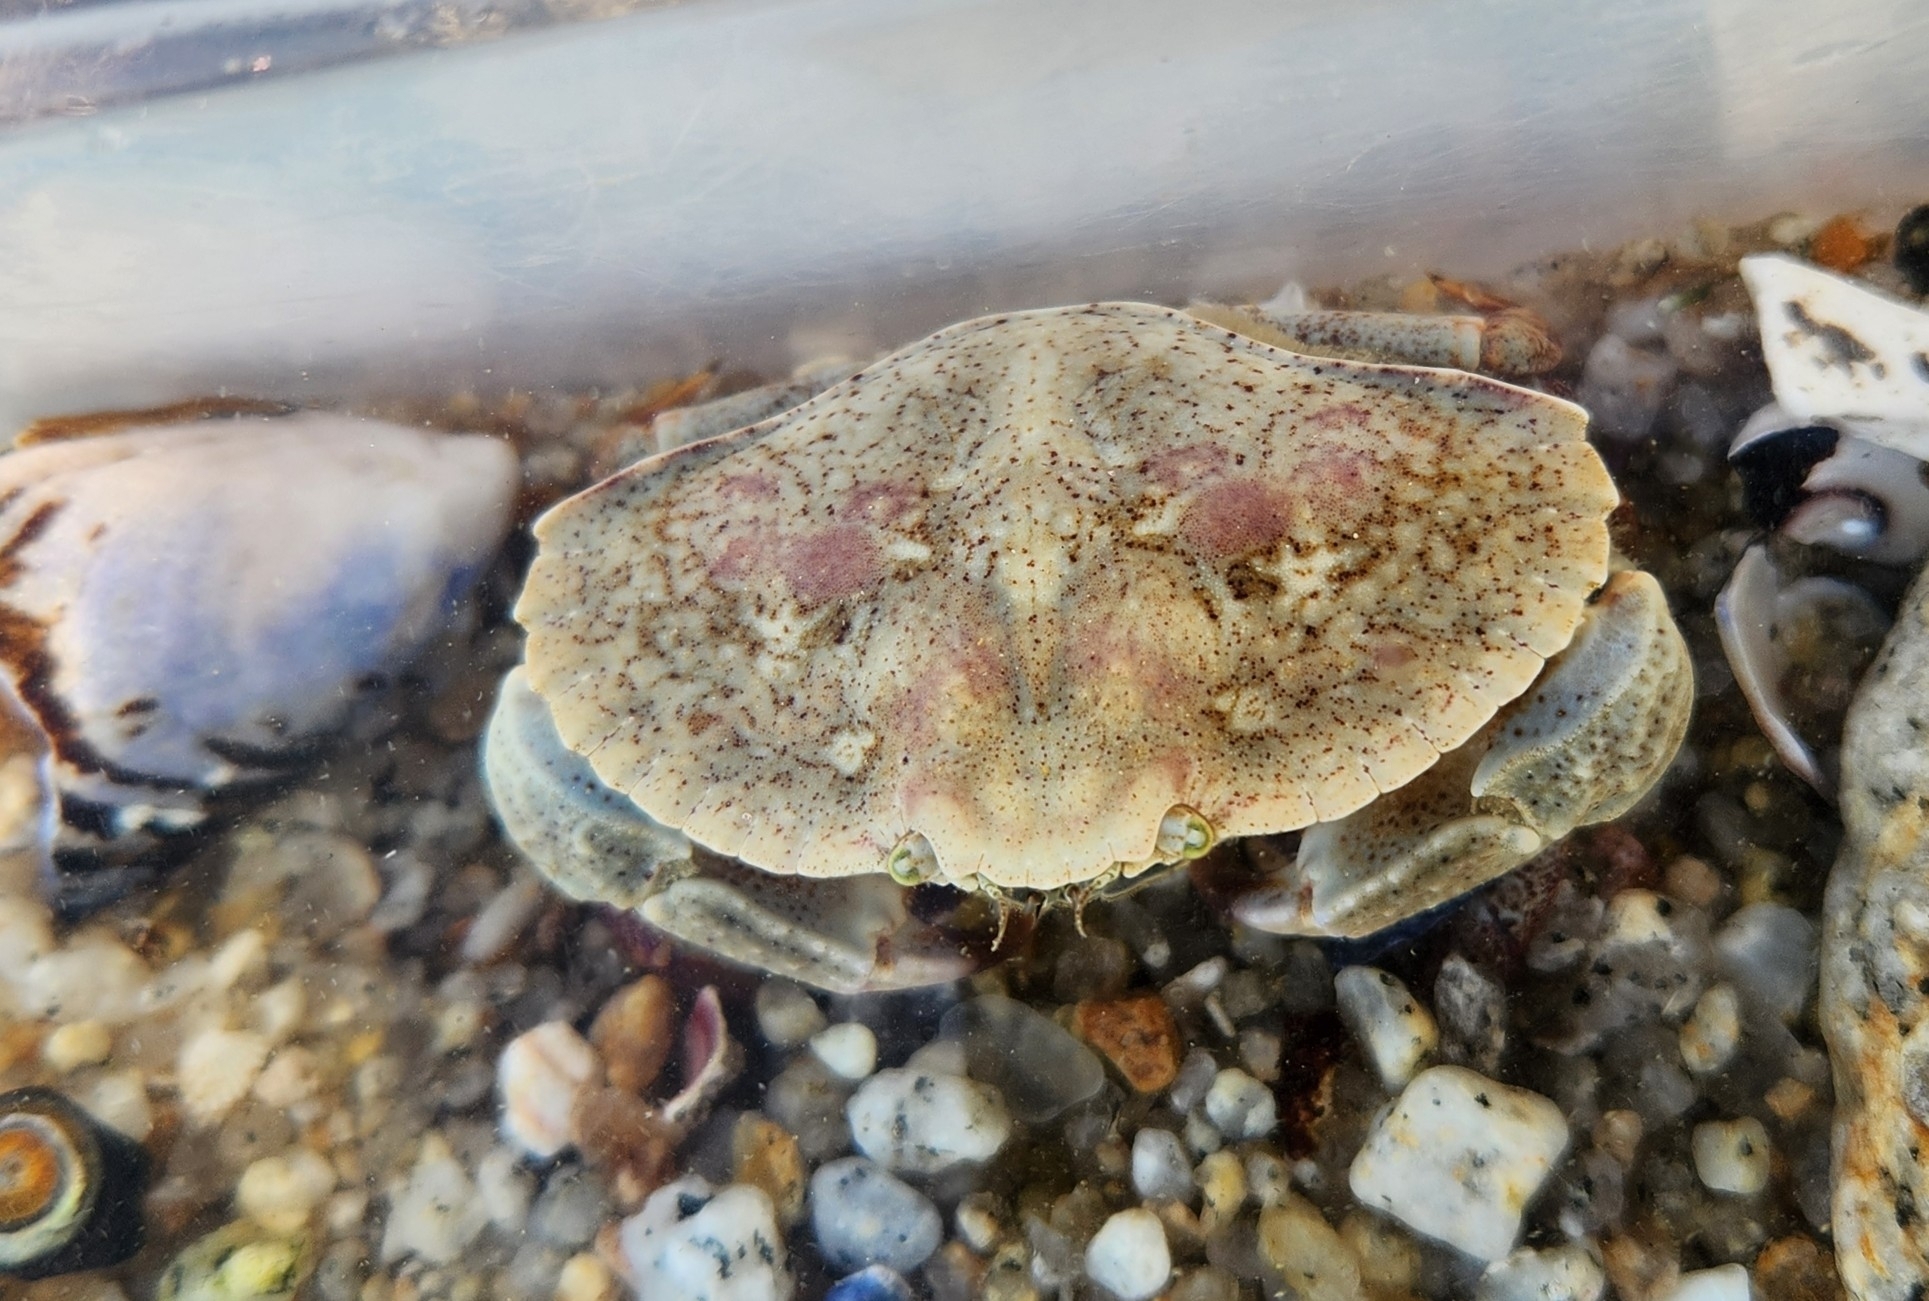 BioFiles - Red Rock Crab (Cancer productus)